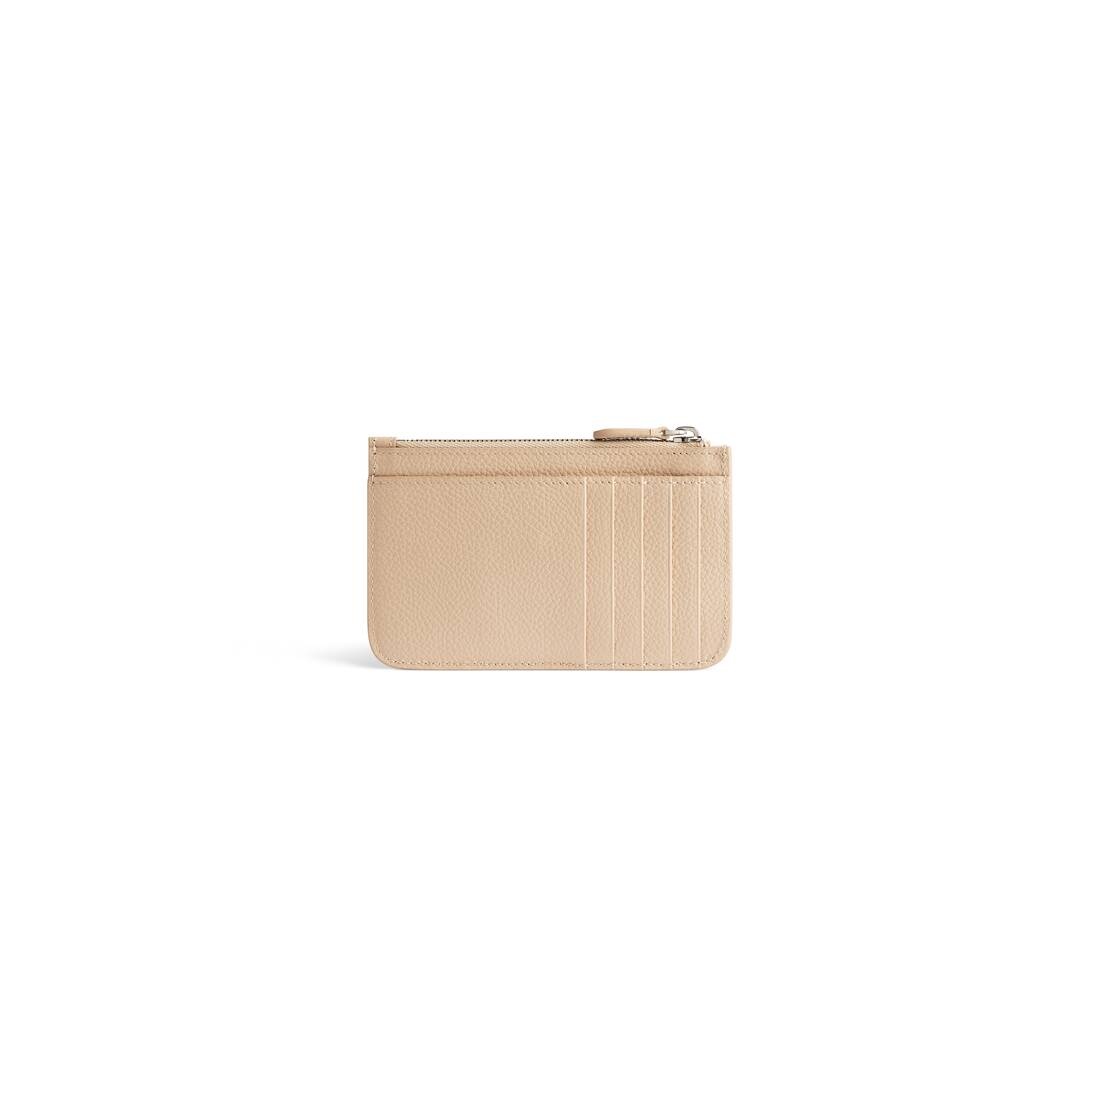 Women's Cash Large Long Coin And Card Holder in Beige/black - 2